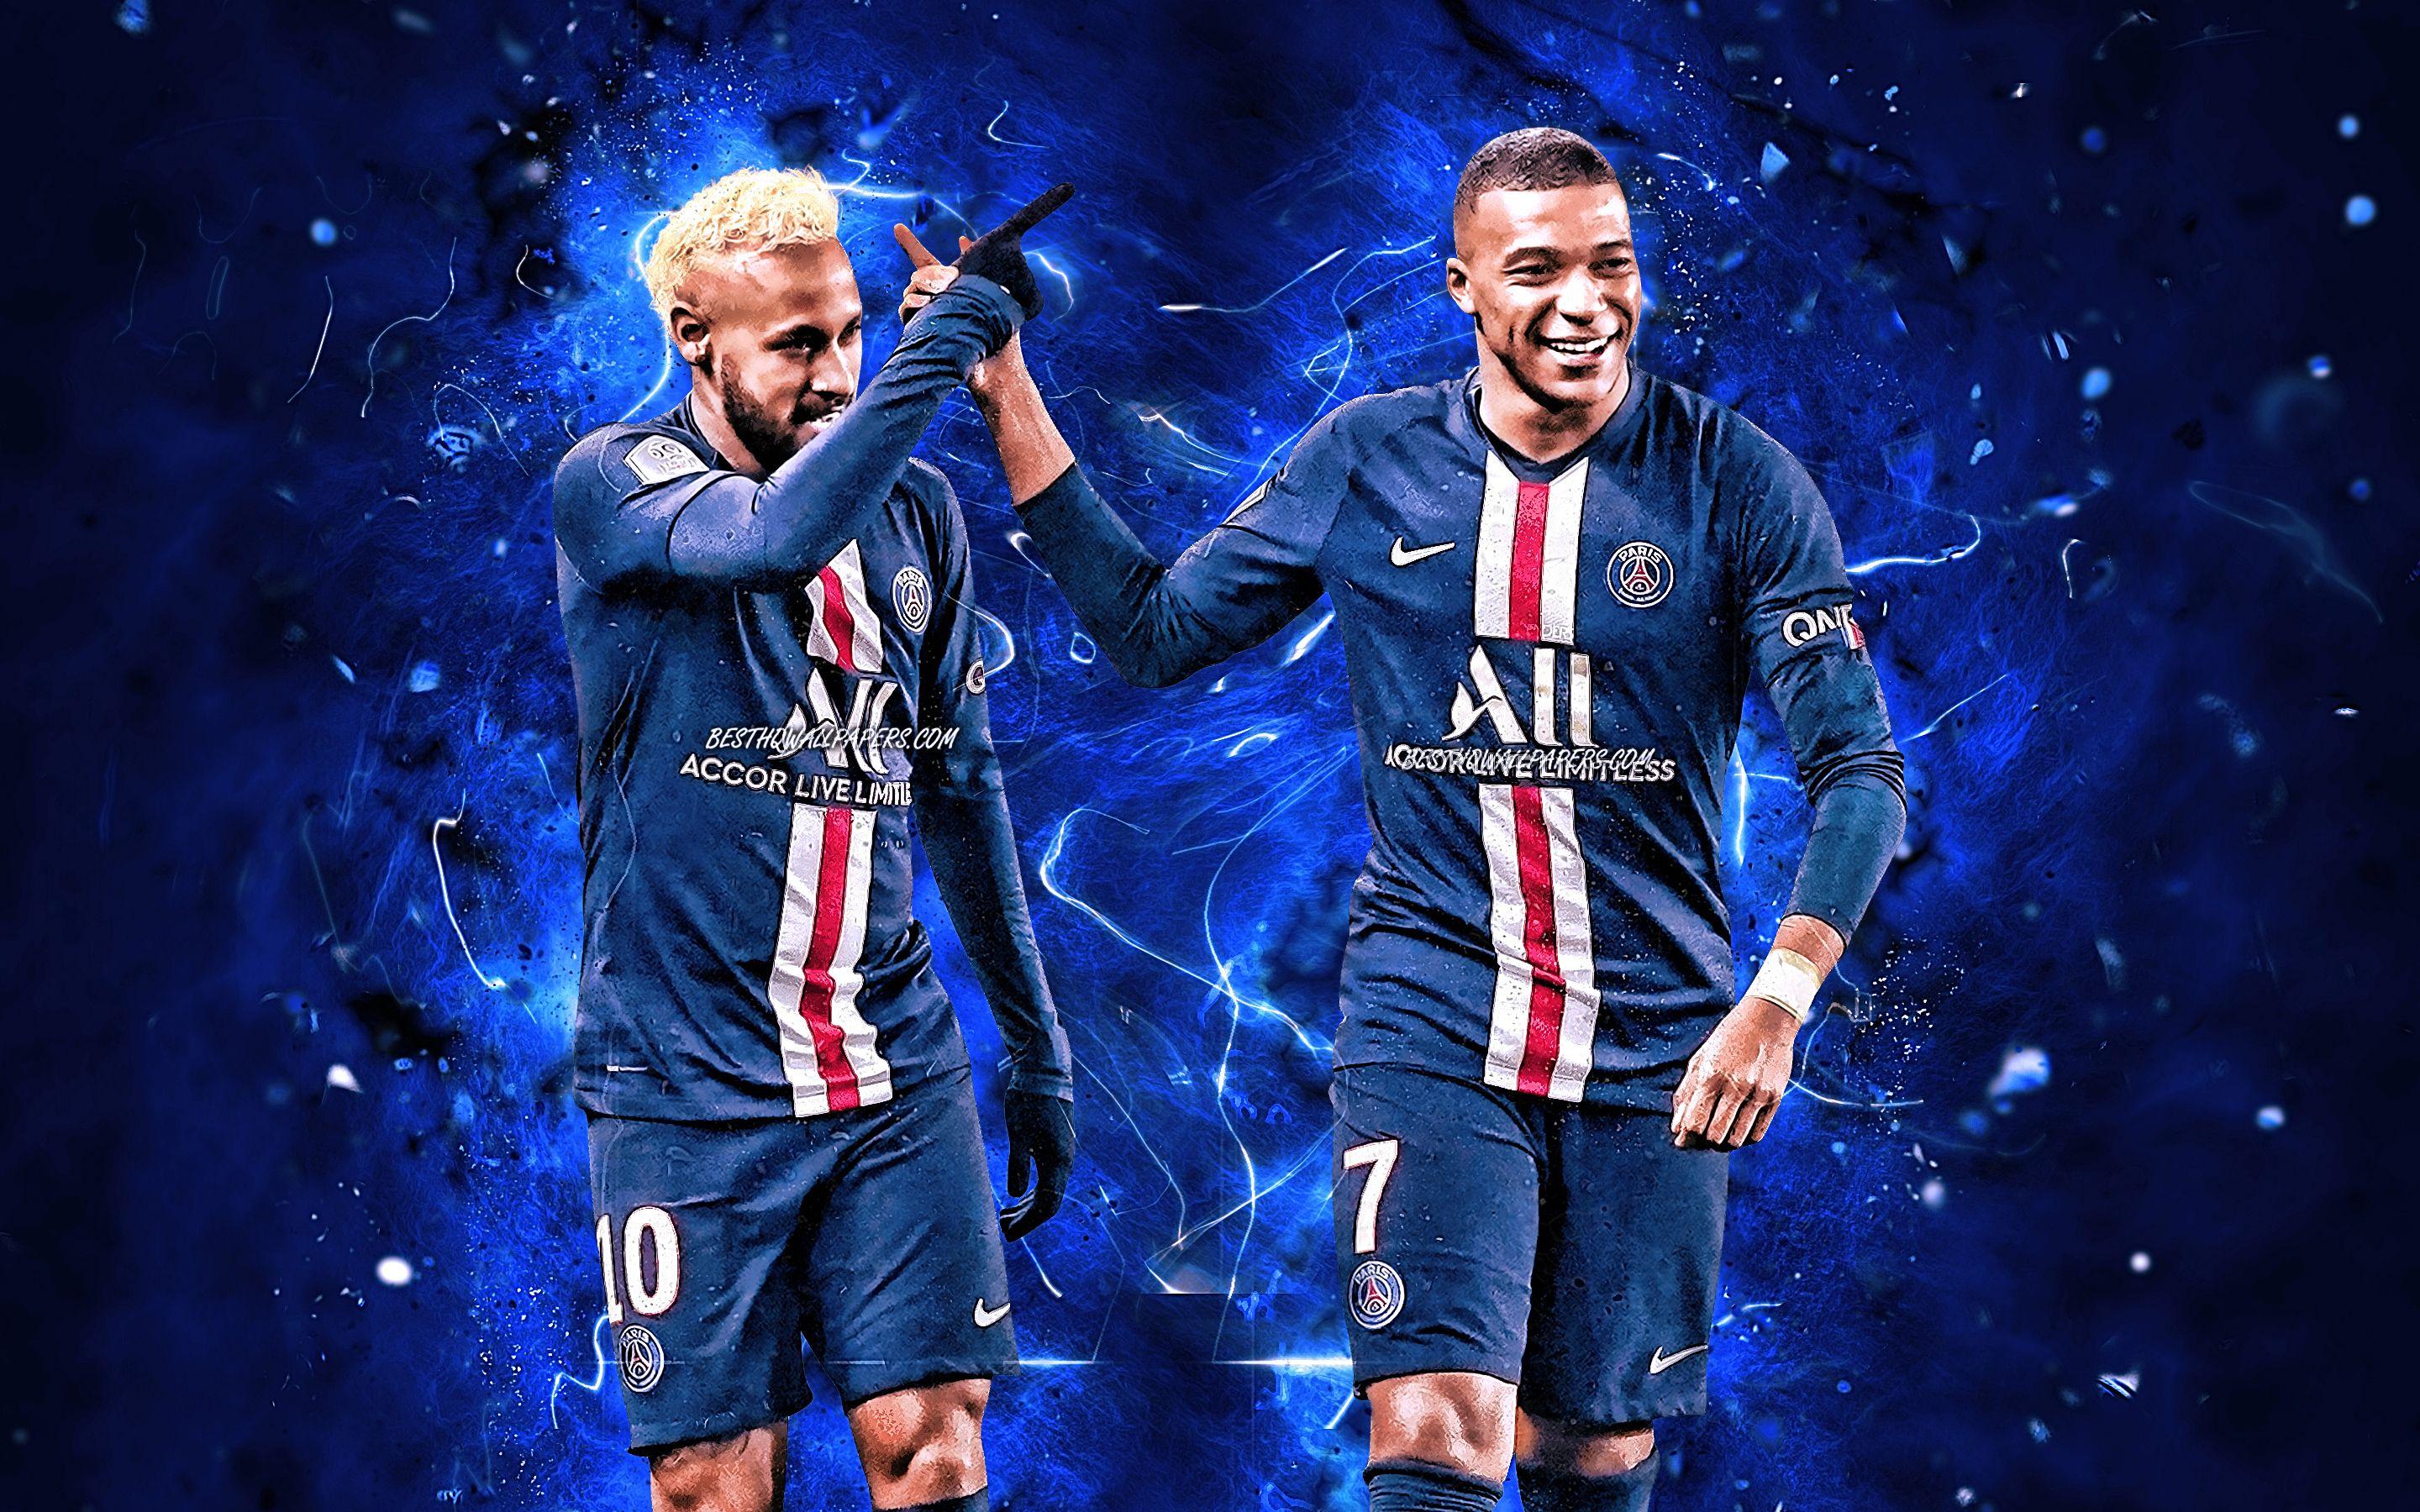 Neymar and Mbappe Wallpapers - Top Free Neymar and Mbappe ...